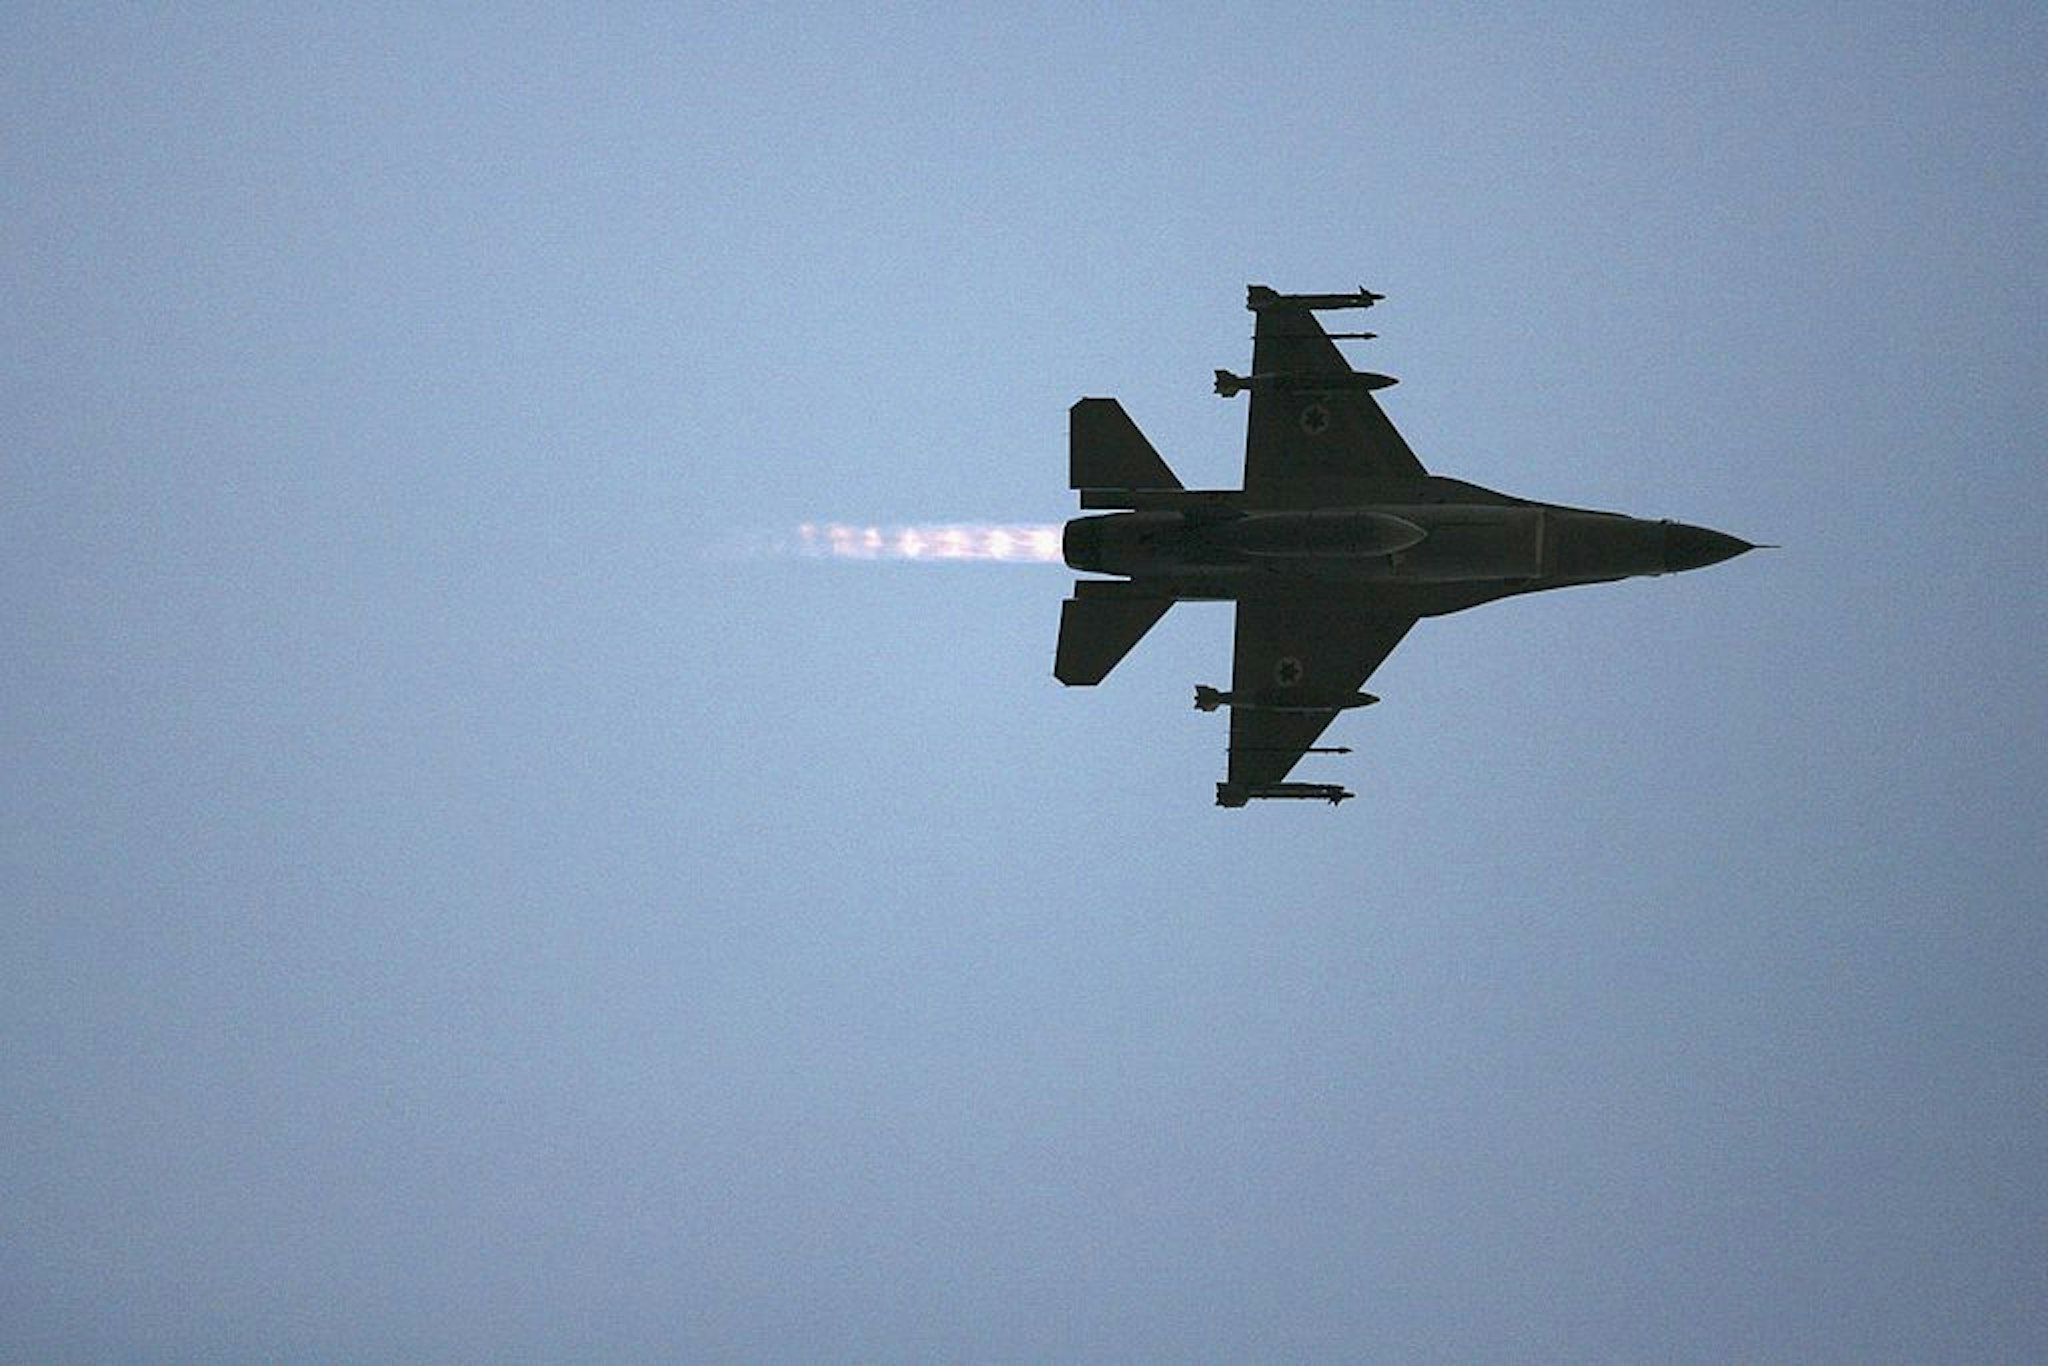 RAMAT DAVID, ISRAEL - JULY 12: (ISRAEL OUT) An F16 warplane takes off for a mission in Lebanon from Ramat David air force base on July 12, 2006, Ramat David, Israel. An assault on Southern Lebanon was launched by Israel following the capture of two Israeli soldiers.